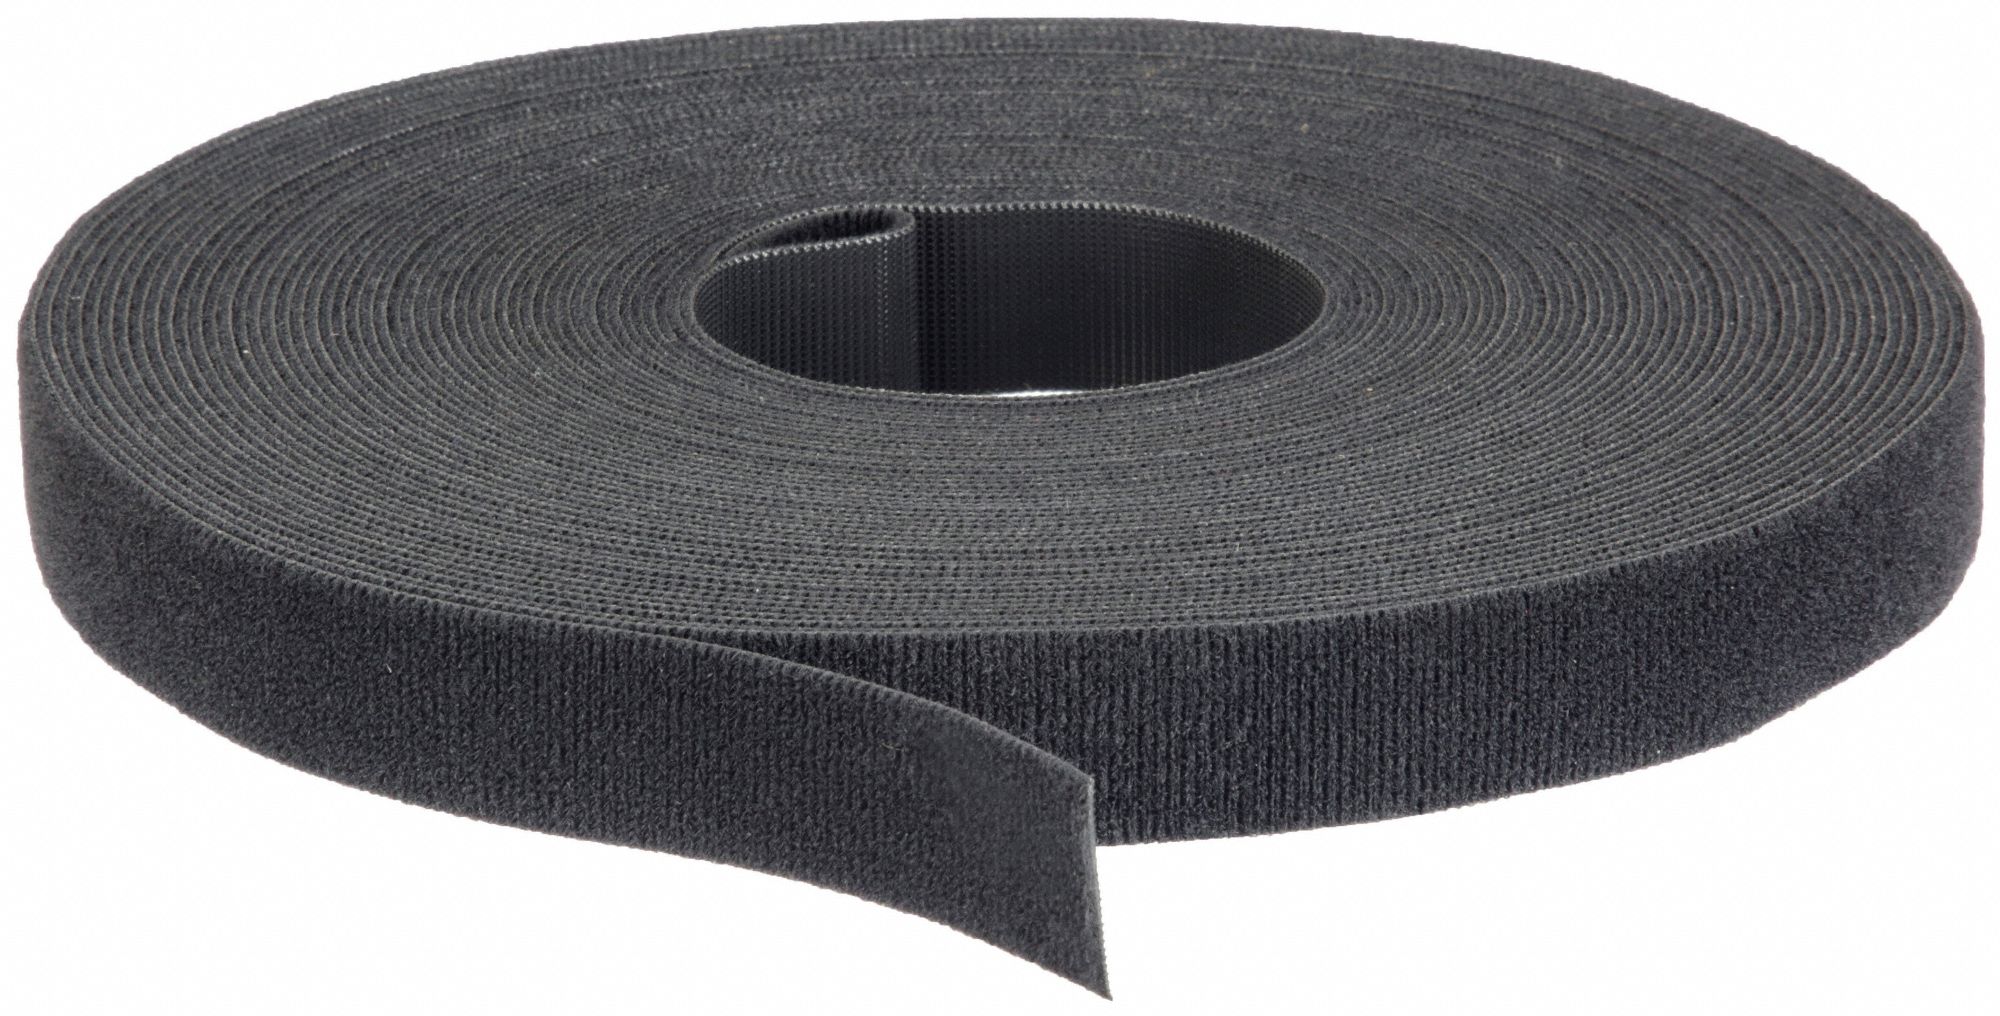 VELCRO BRAND, 75 ft Lg, 1 in Wd, Hook-and-Loop Cable Tie Roll